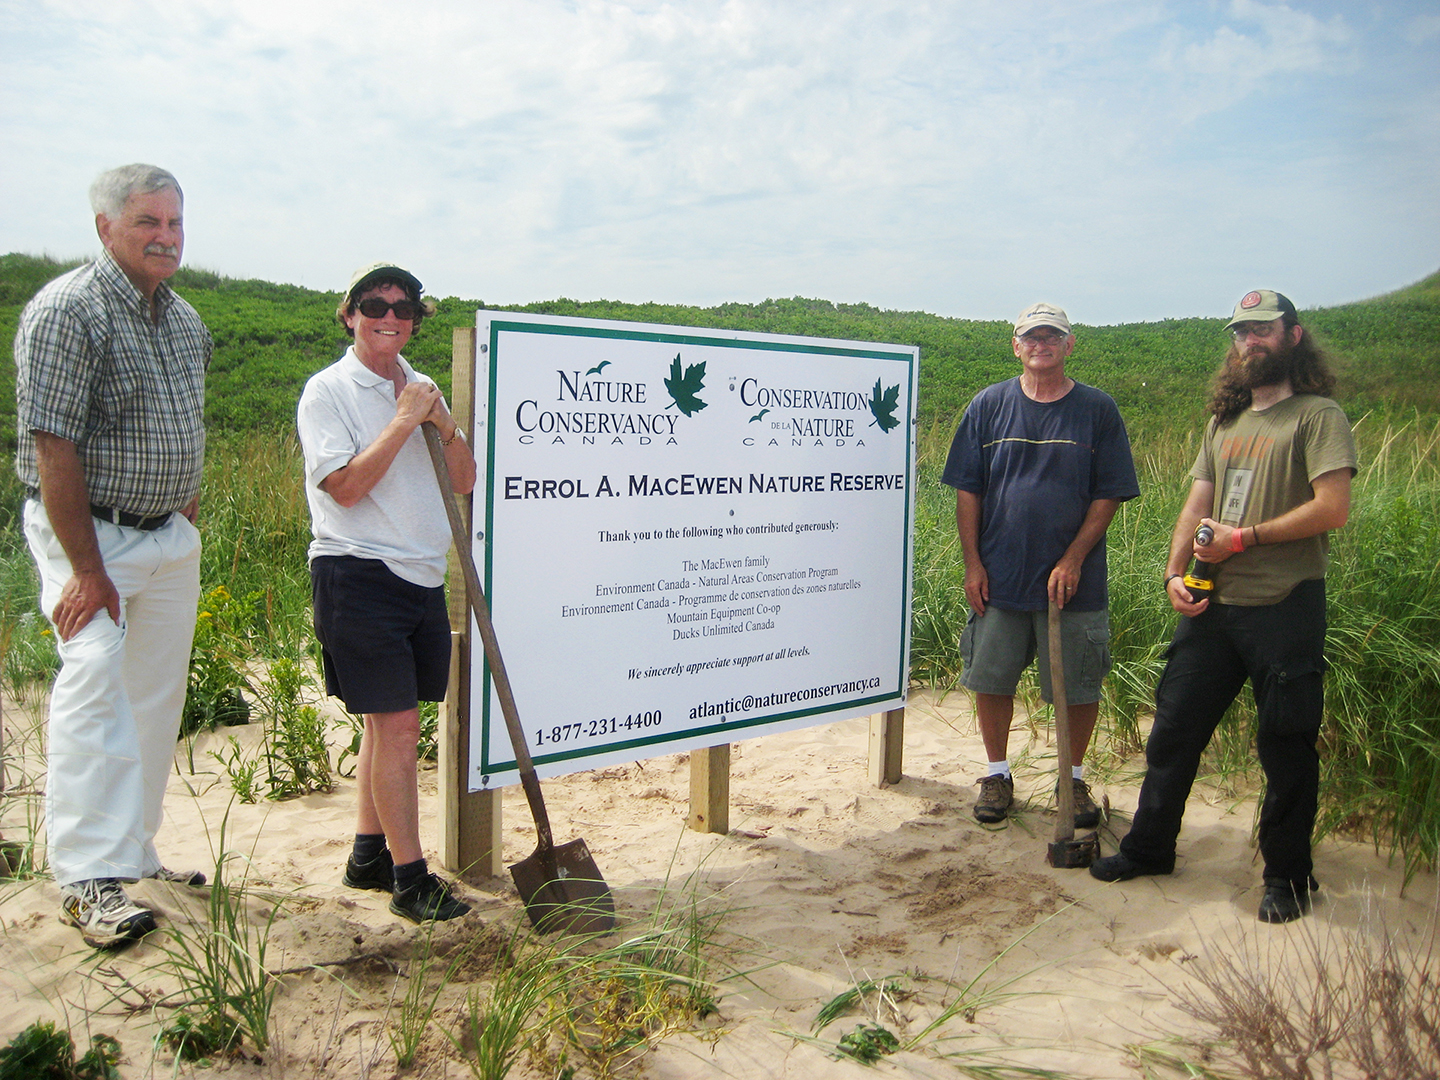 Senator Diane Griffin, second from left, helps put up a sign in the St. Peter’s Harbour sand dunes, with members of the MacEwen family who donated a parcel of land to the Nature Conservancy of Canada in 2015.